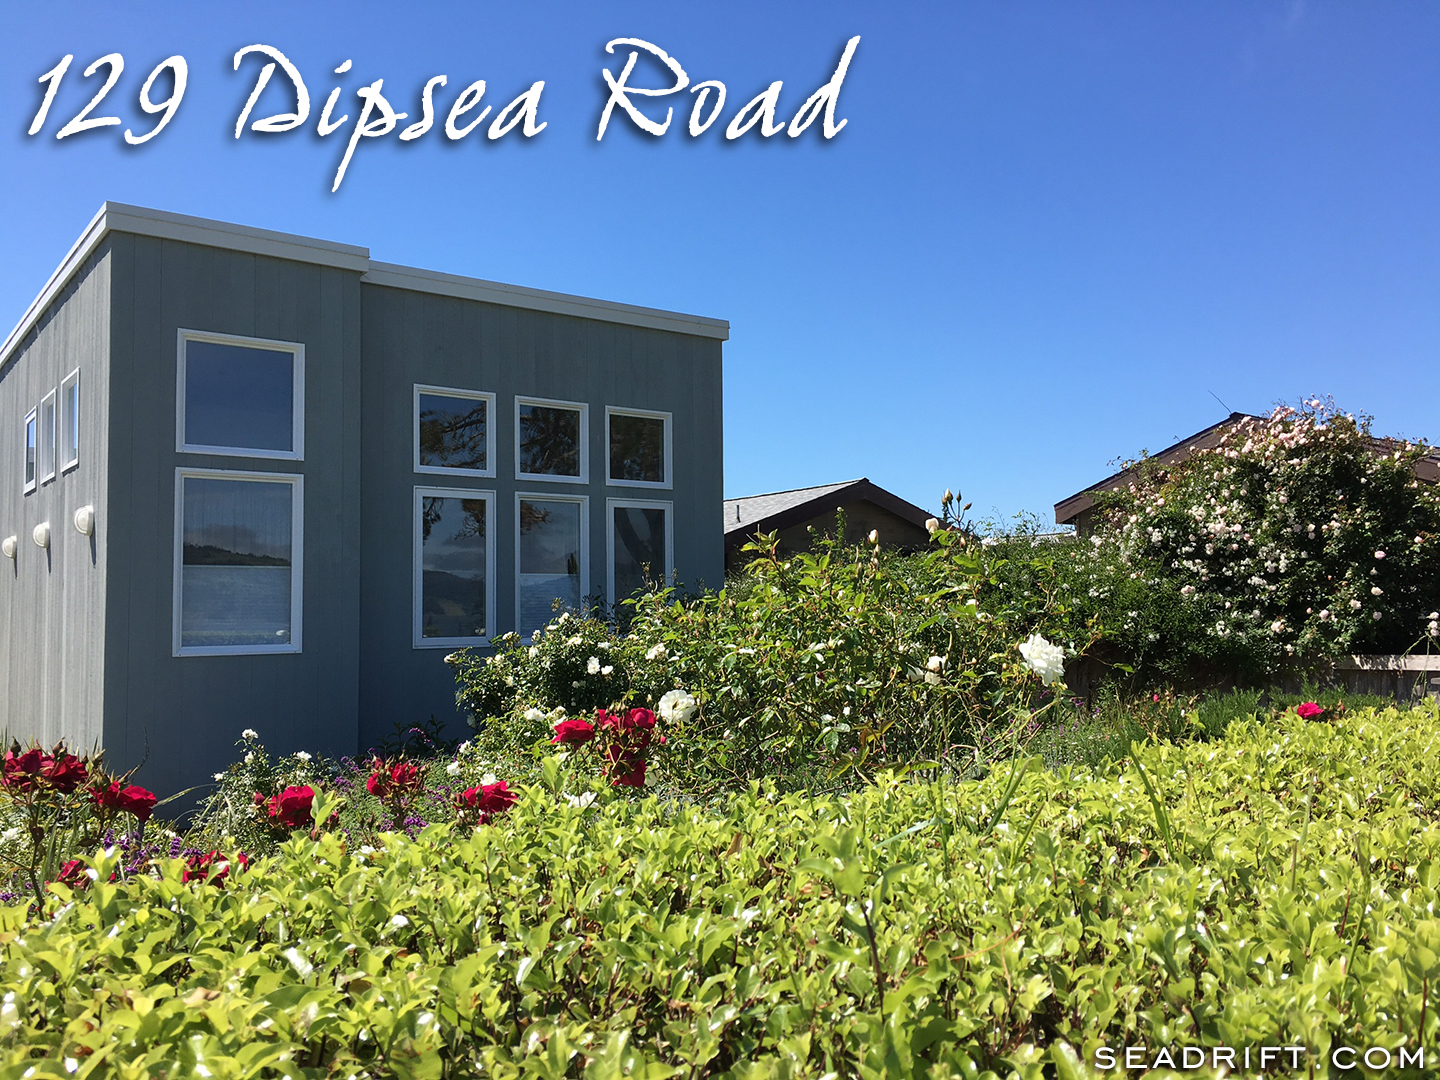 129 Dipsea Road, Stinson Beach — View of house from lagoon